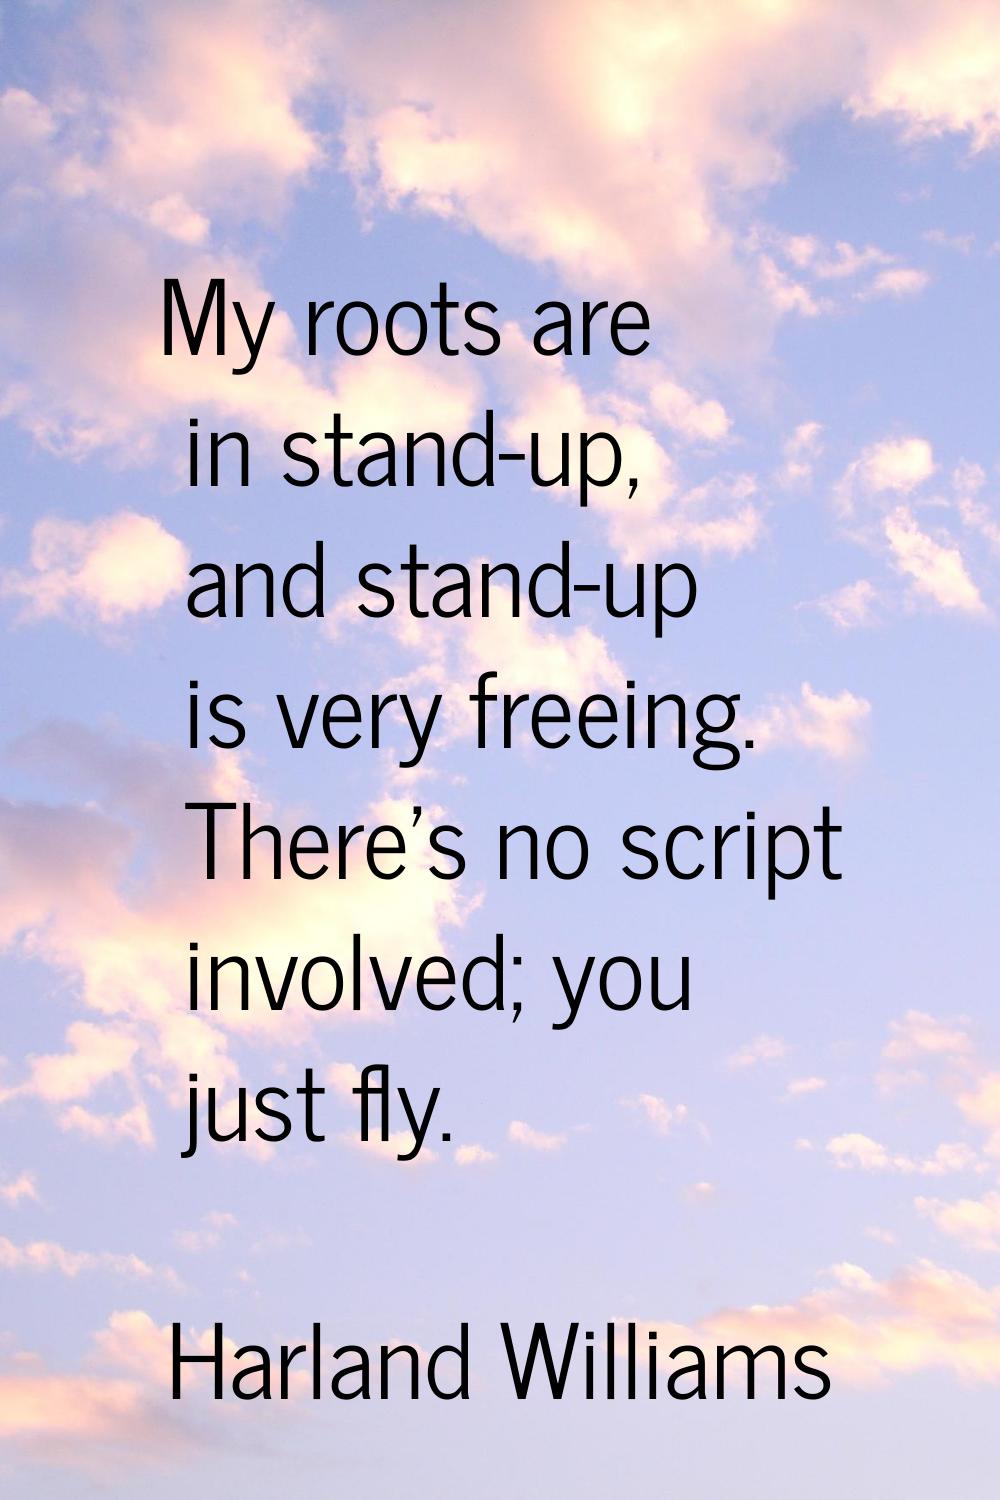 My roots are in stand-up, and stand-up is very freeing. There's no script involved; you just fly.